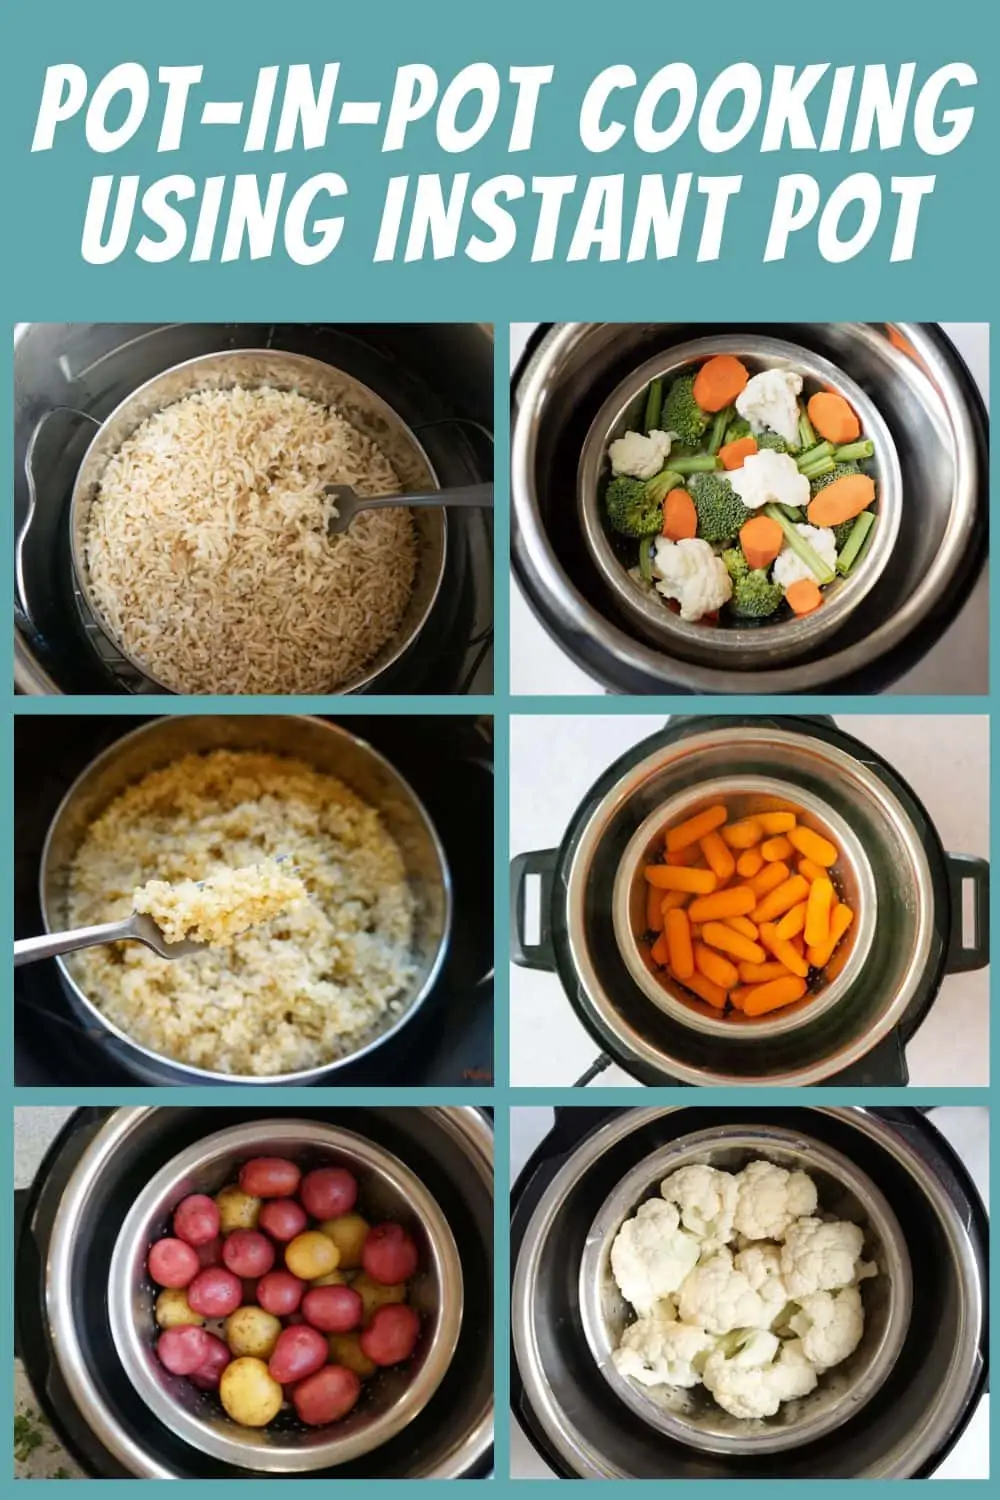 How to do Pot-In-Pot Cooking with Instant Pot